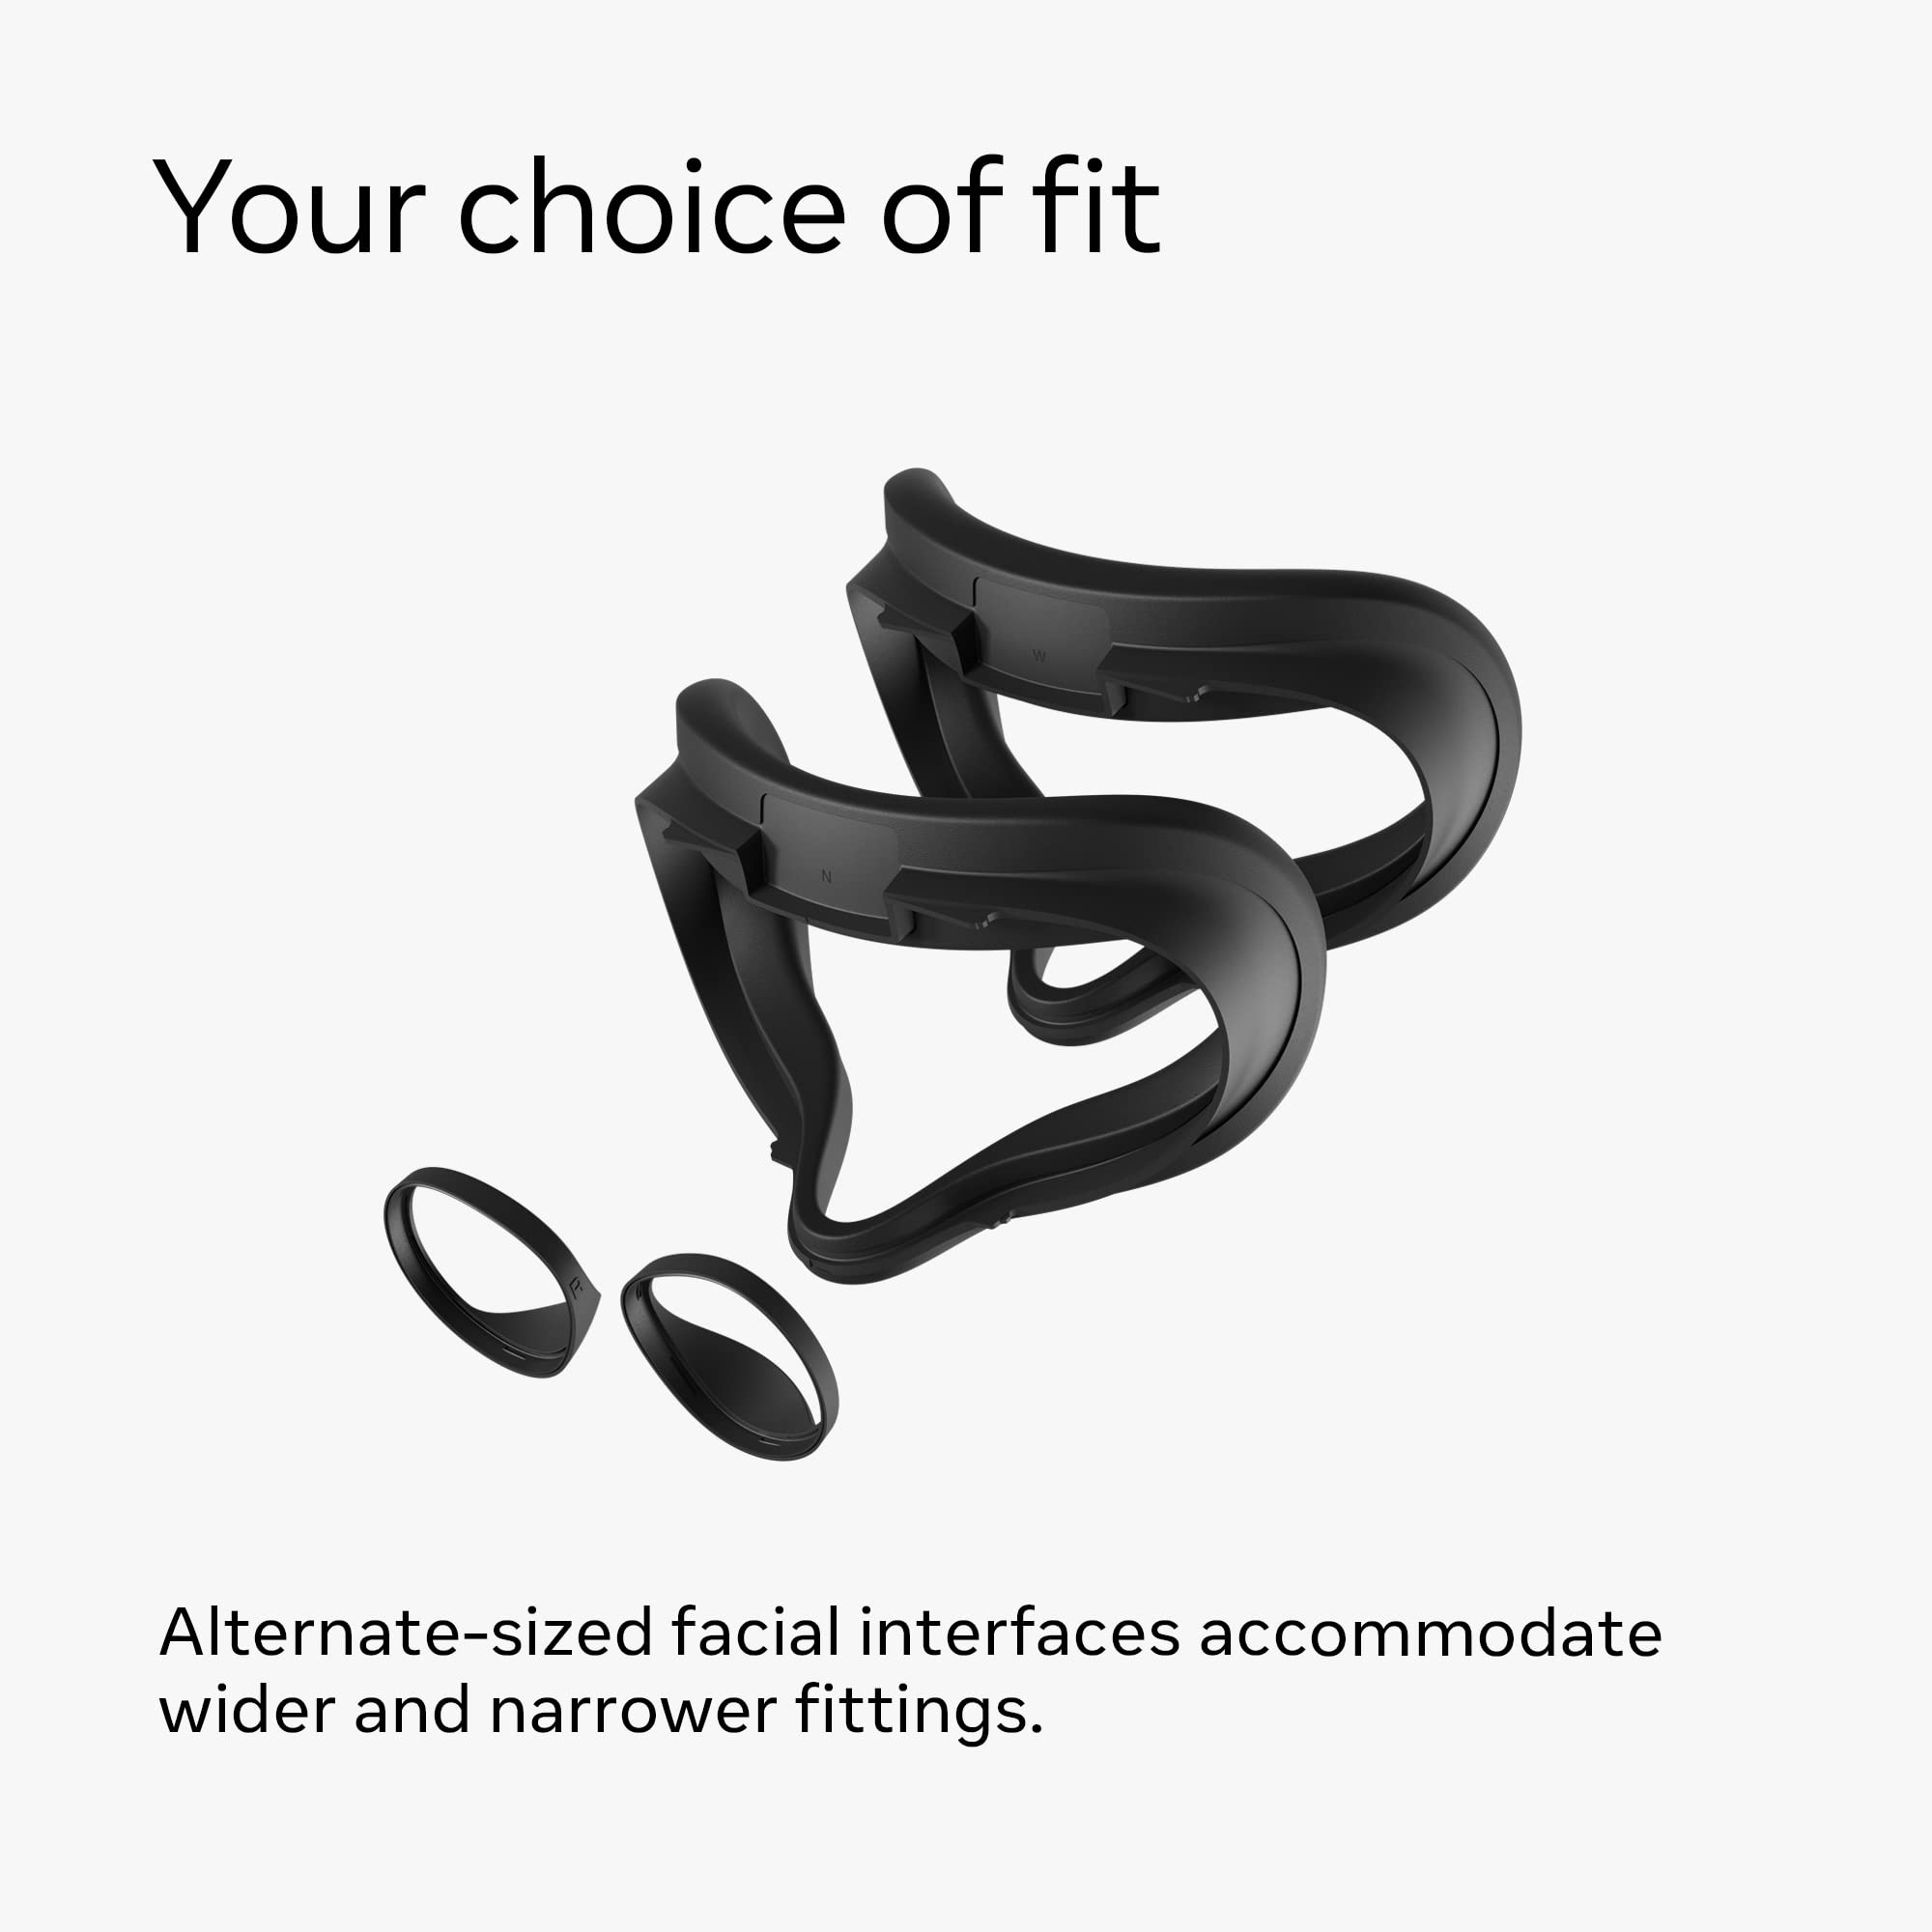 Quest 2 Fit Pack with Two Alternate-Width Facial Interfaces and Light Blockers - VR